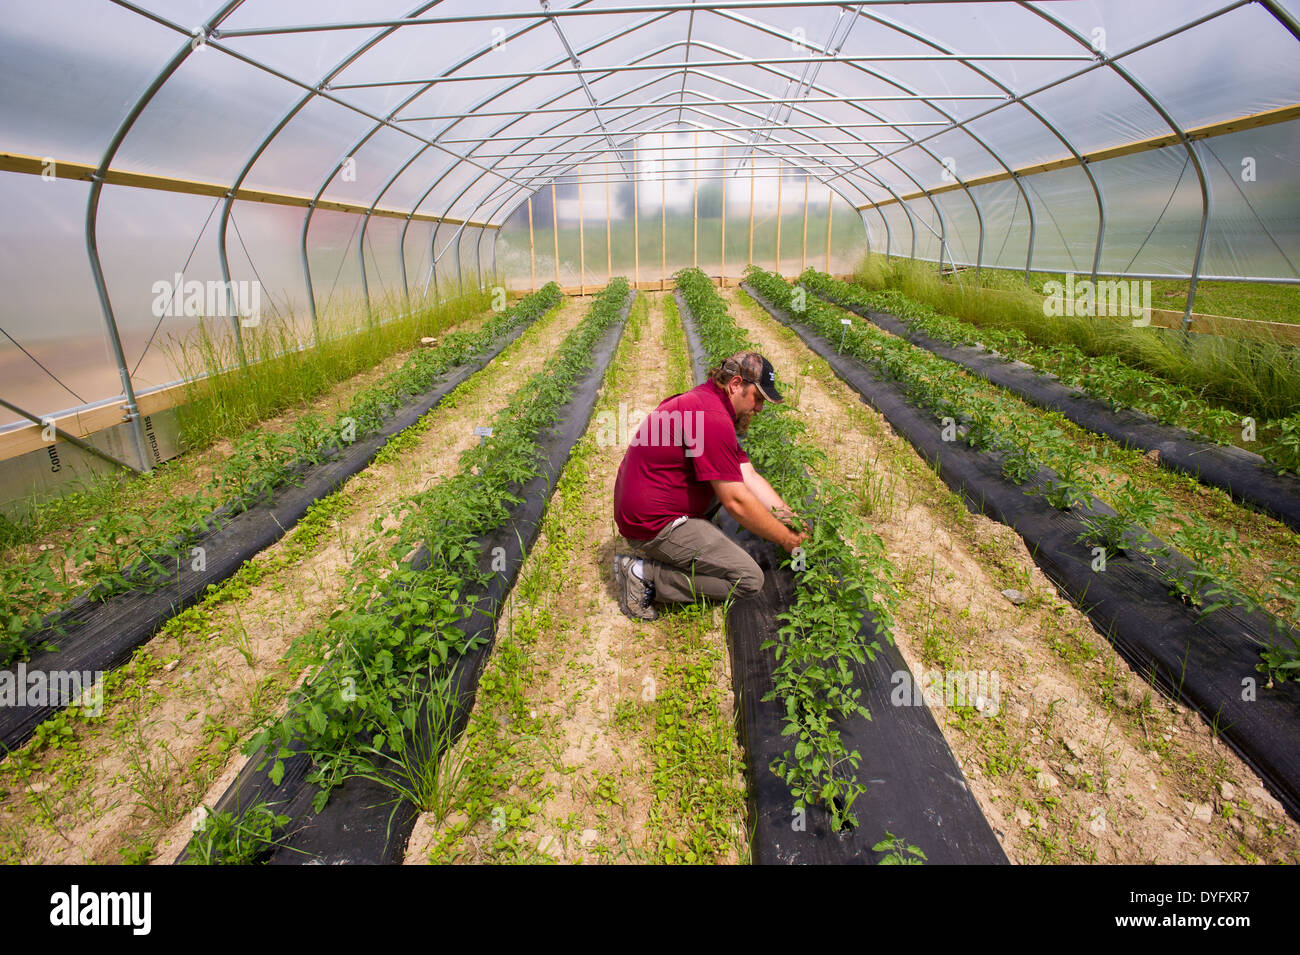 Man Caring For Plants in Greenhouse Stock Photo